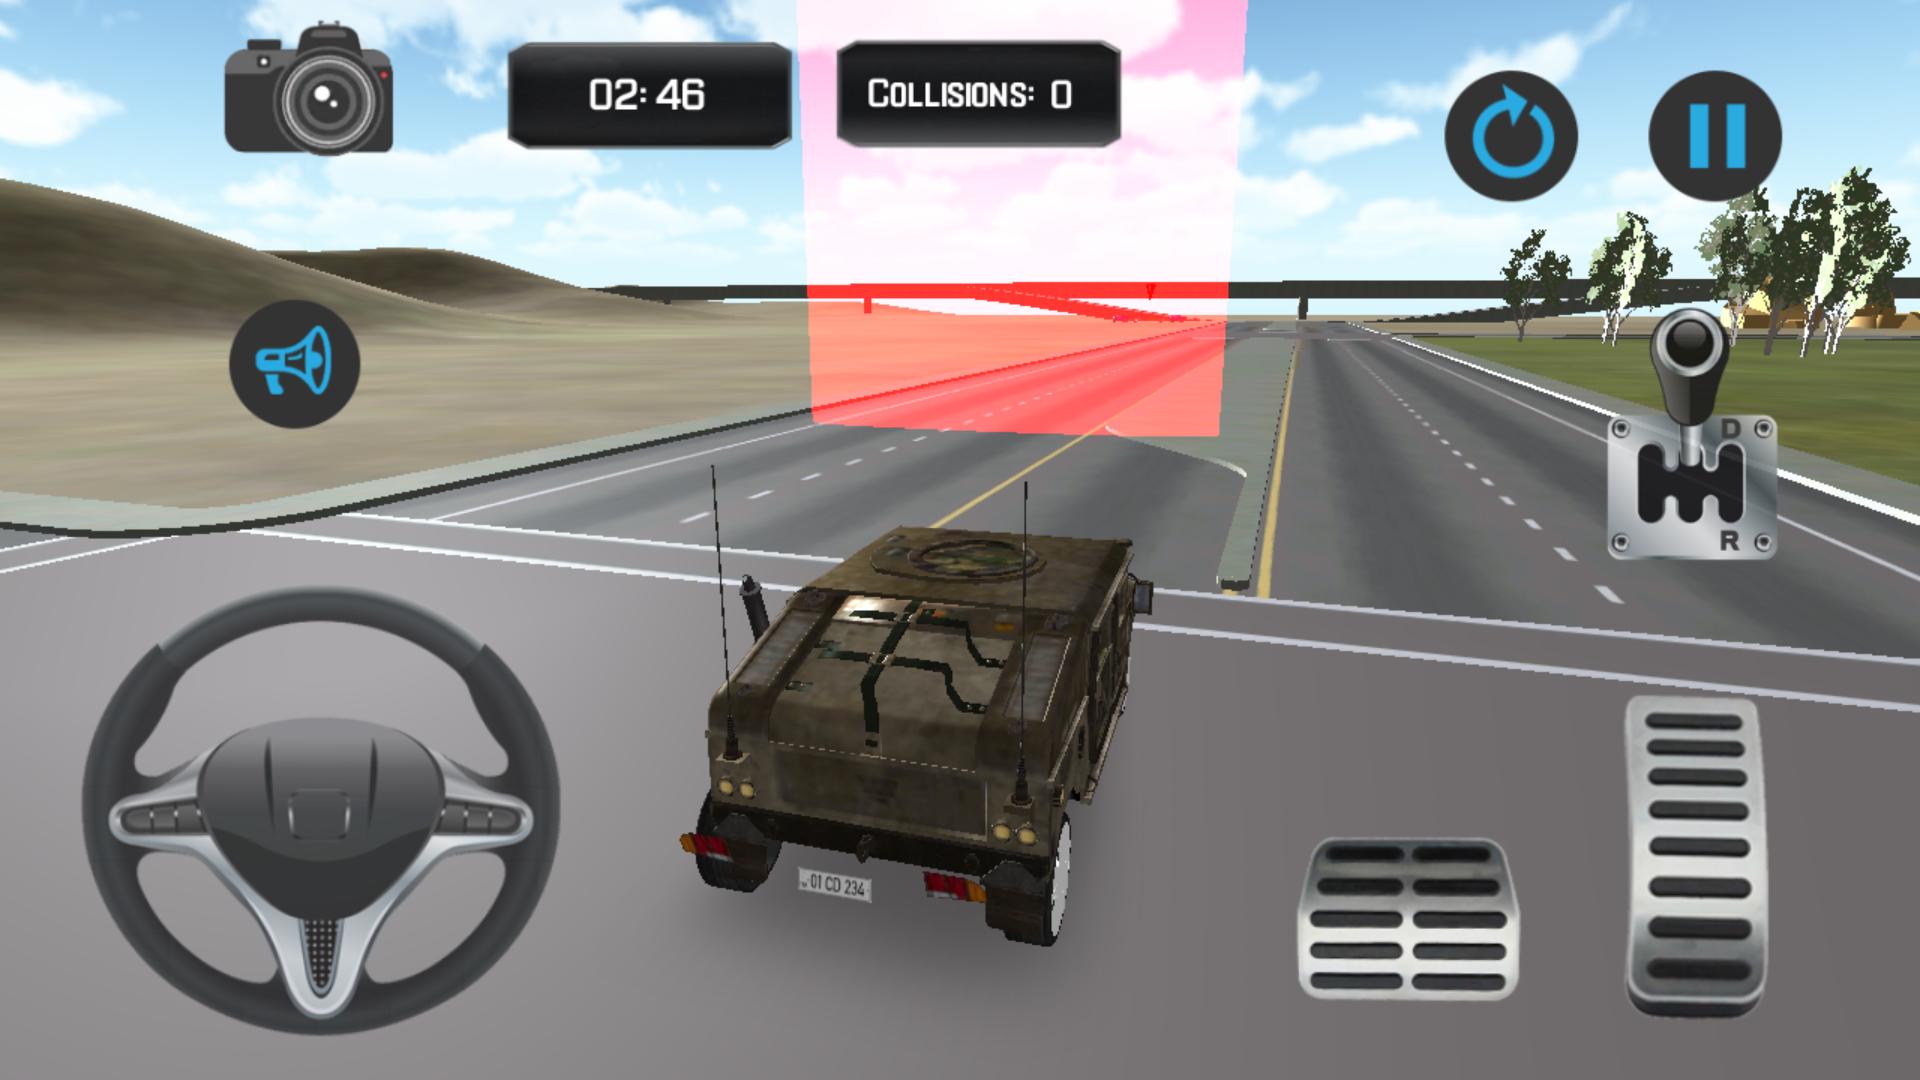 4x4 Military Humvee Simulator For Android Apk Download - army humvee roblox